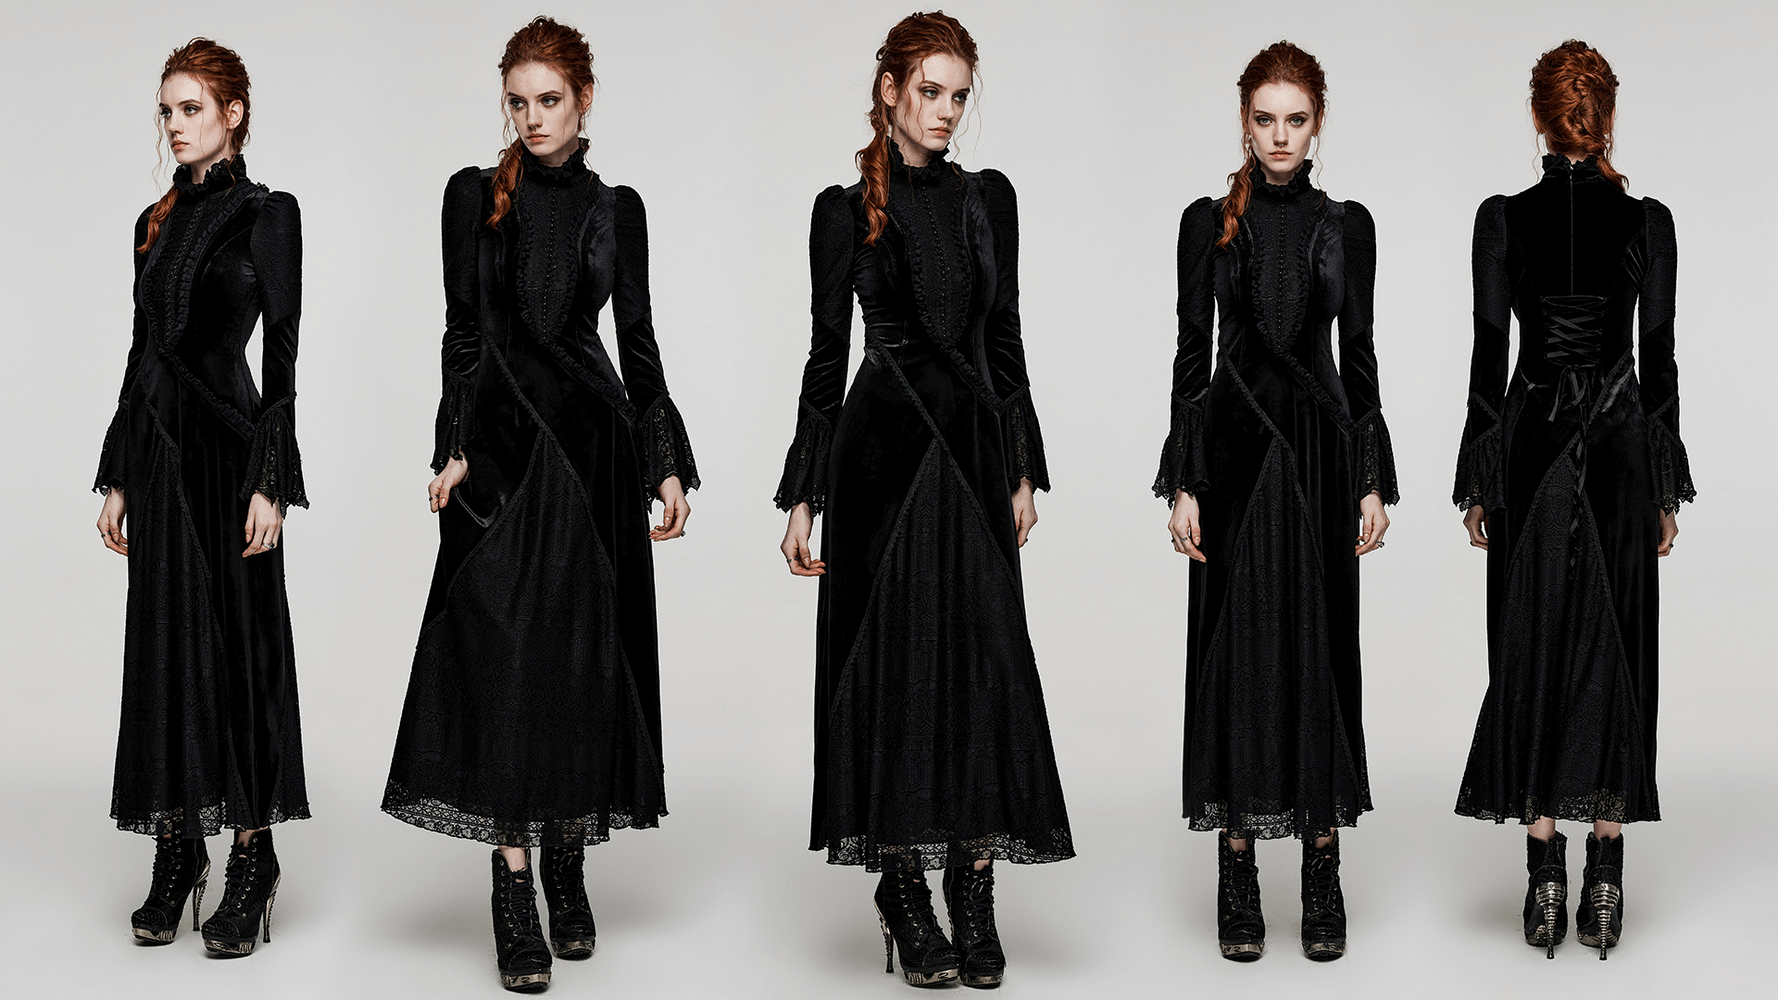 Gothic Lace-Accent Velvet Daily Dress With Flared Sleeves - HARD'N'HEAVY